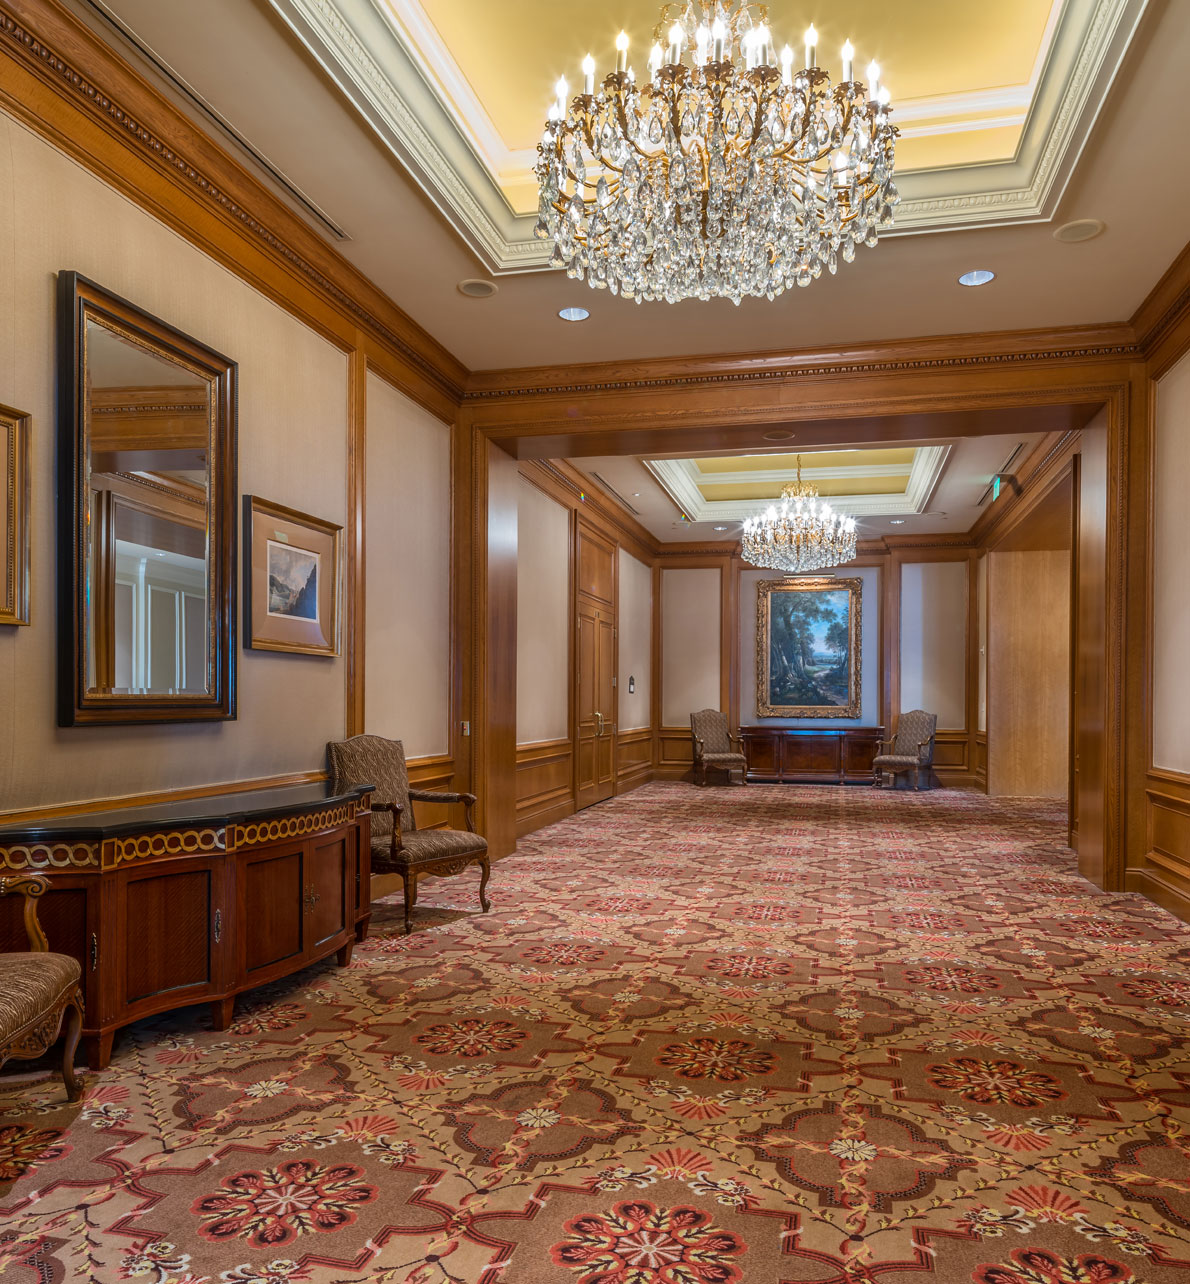 Savoy and Envoy reception area at the Grand America Hotel with chandeliers and wood trim.